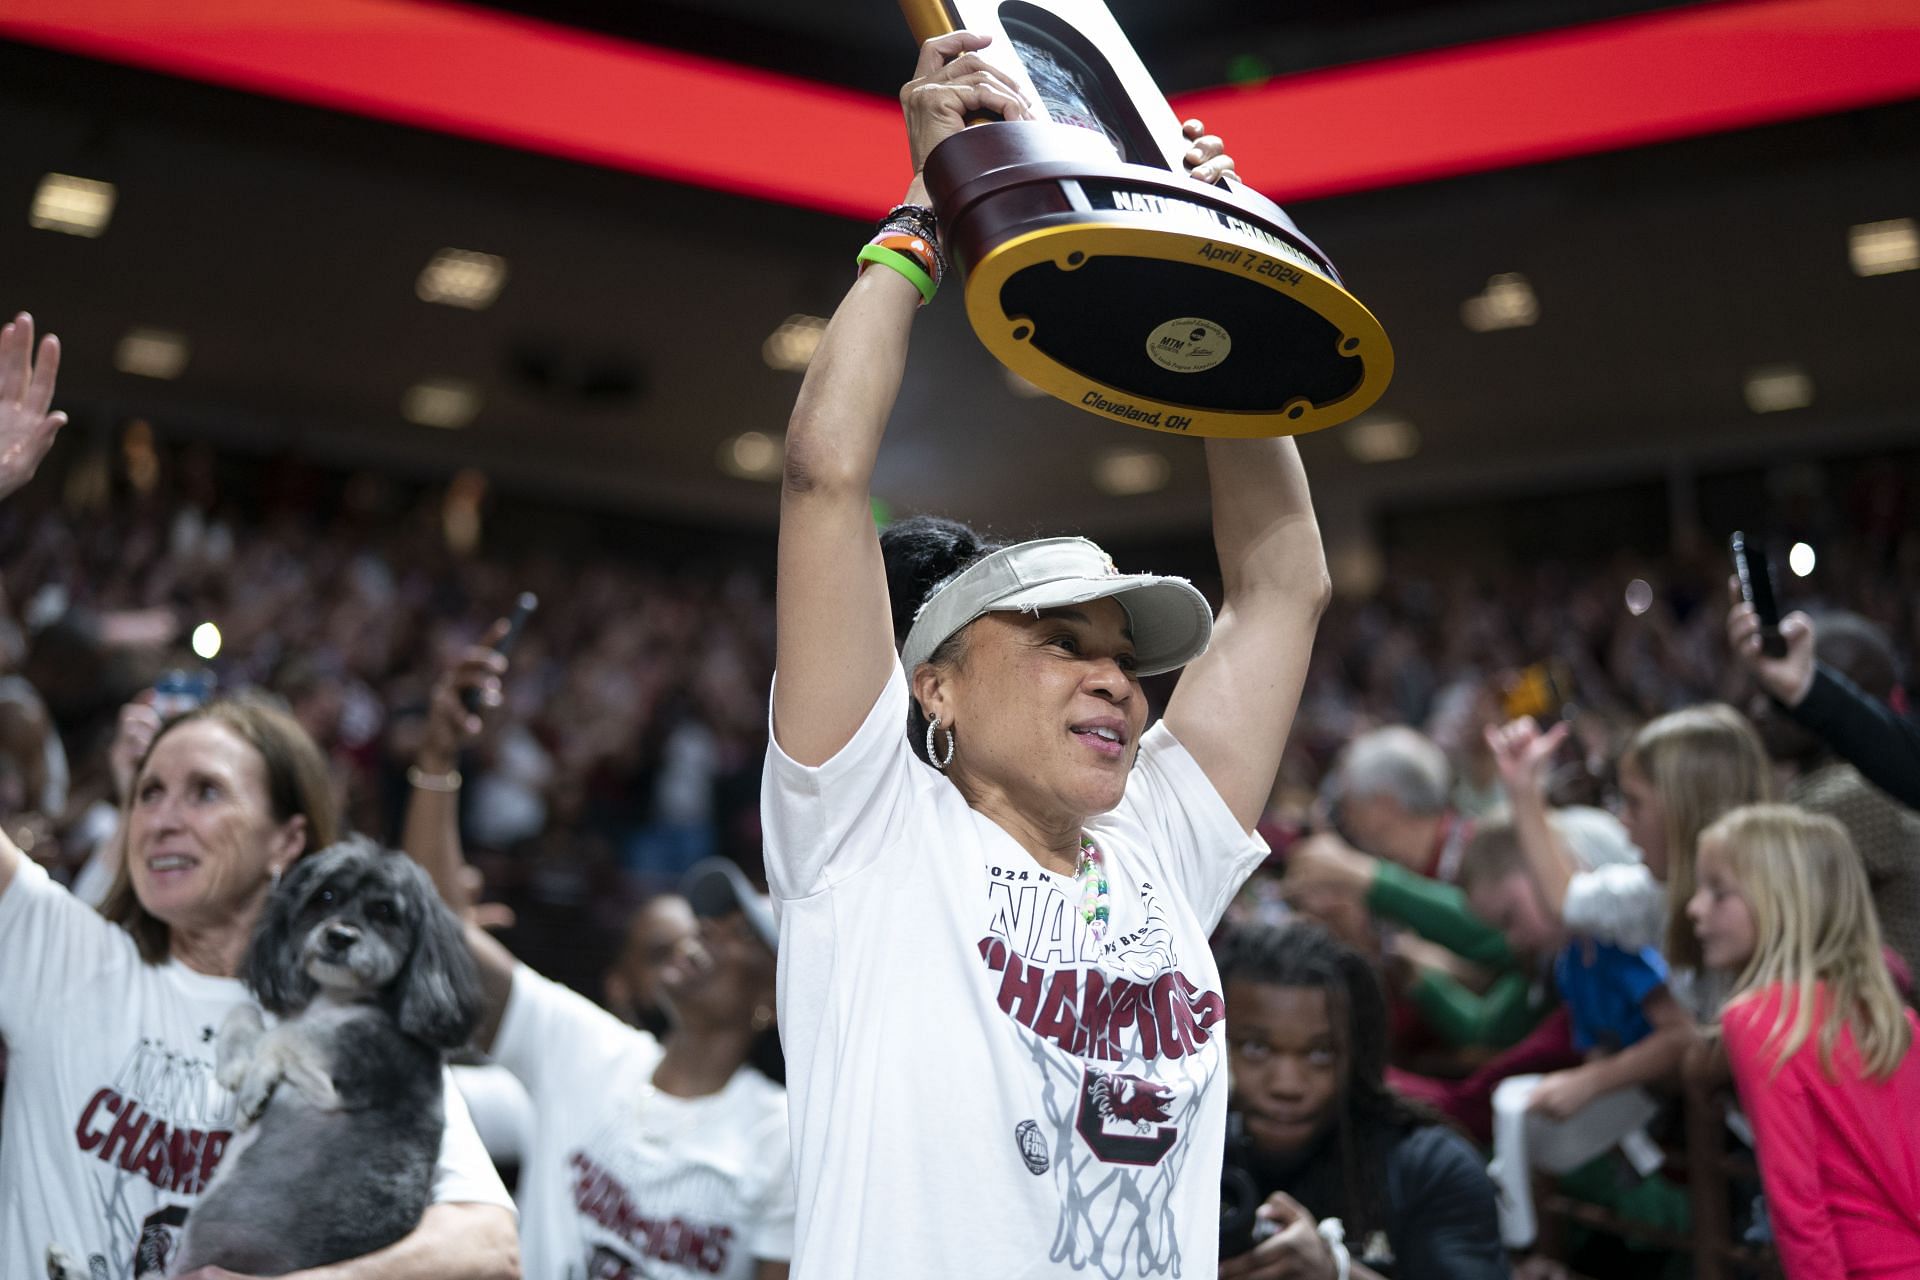 South Carolina coach Dawn Staley had three seniors on her team and two elected to return to school rather than enter the WNBA Draft.